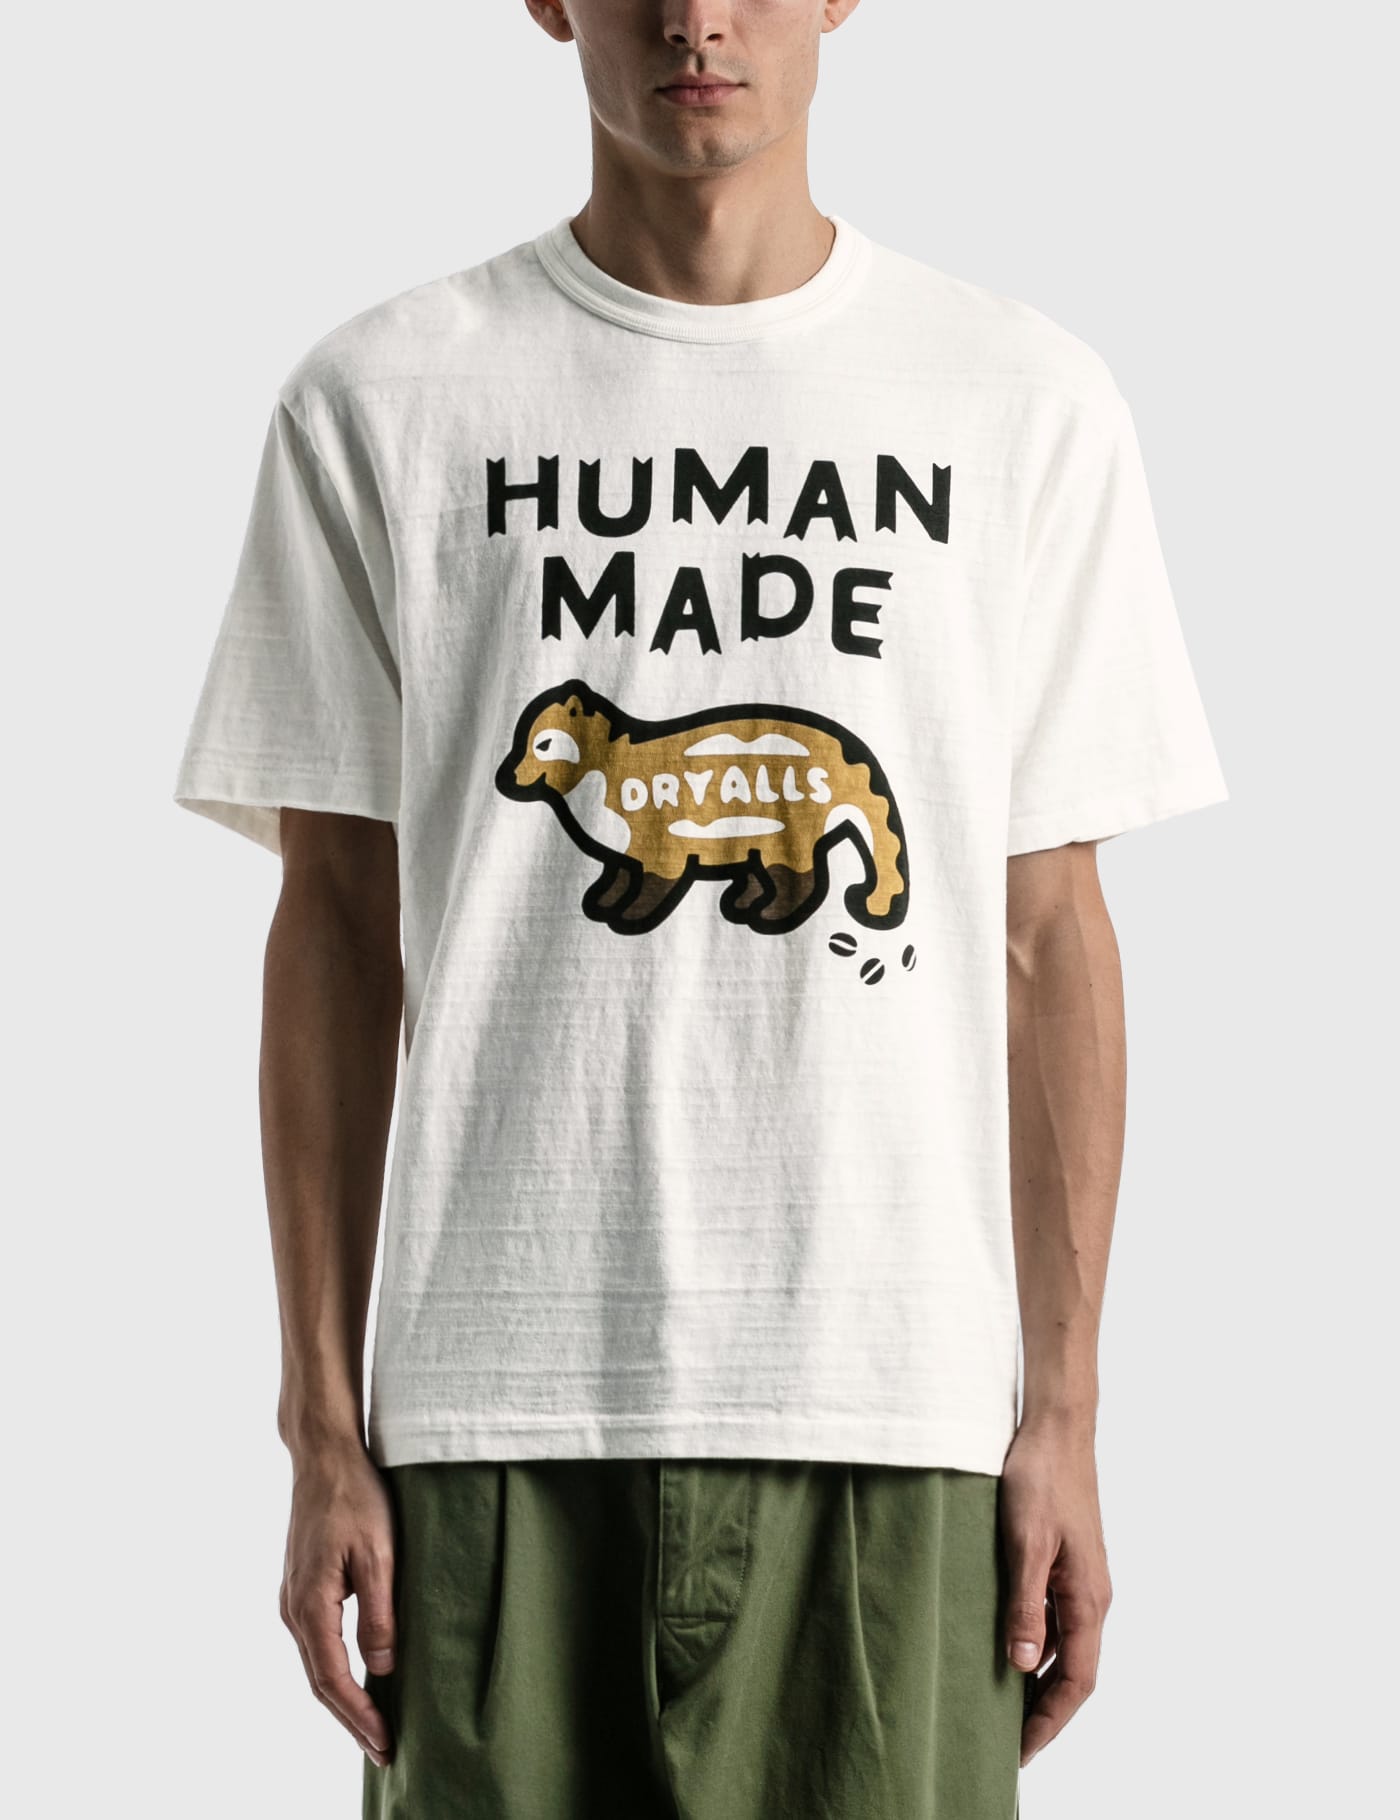 Human Made - T-shirt #2103 | HBX - Globally Curated Fashion and 